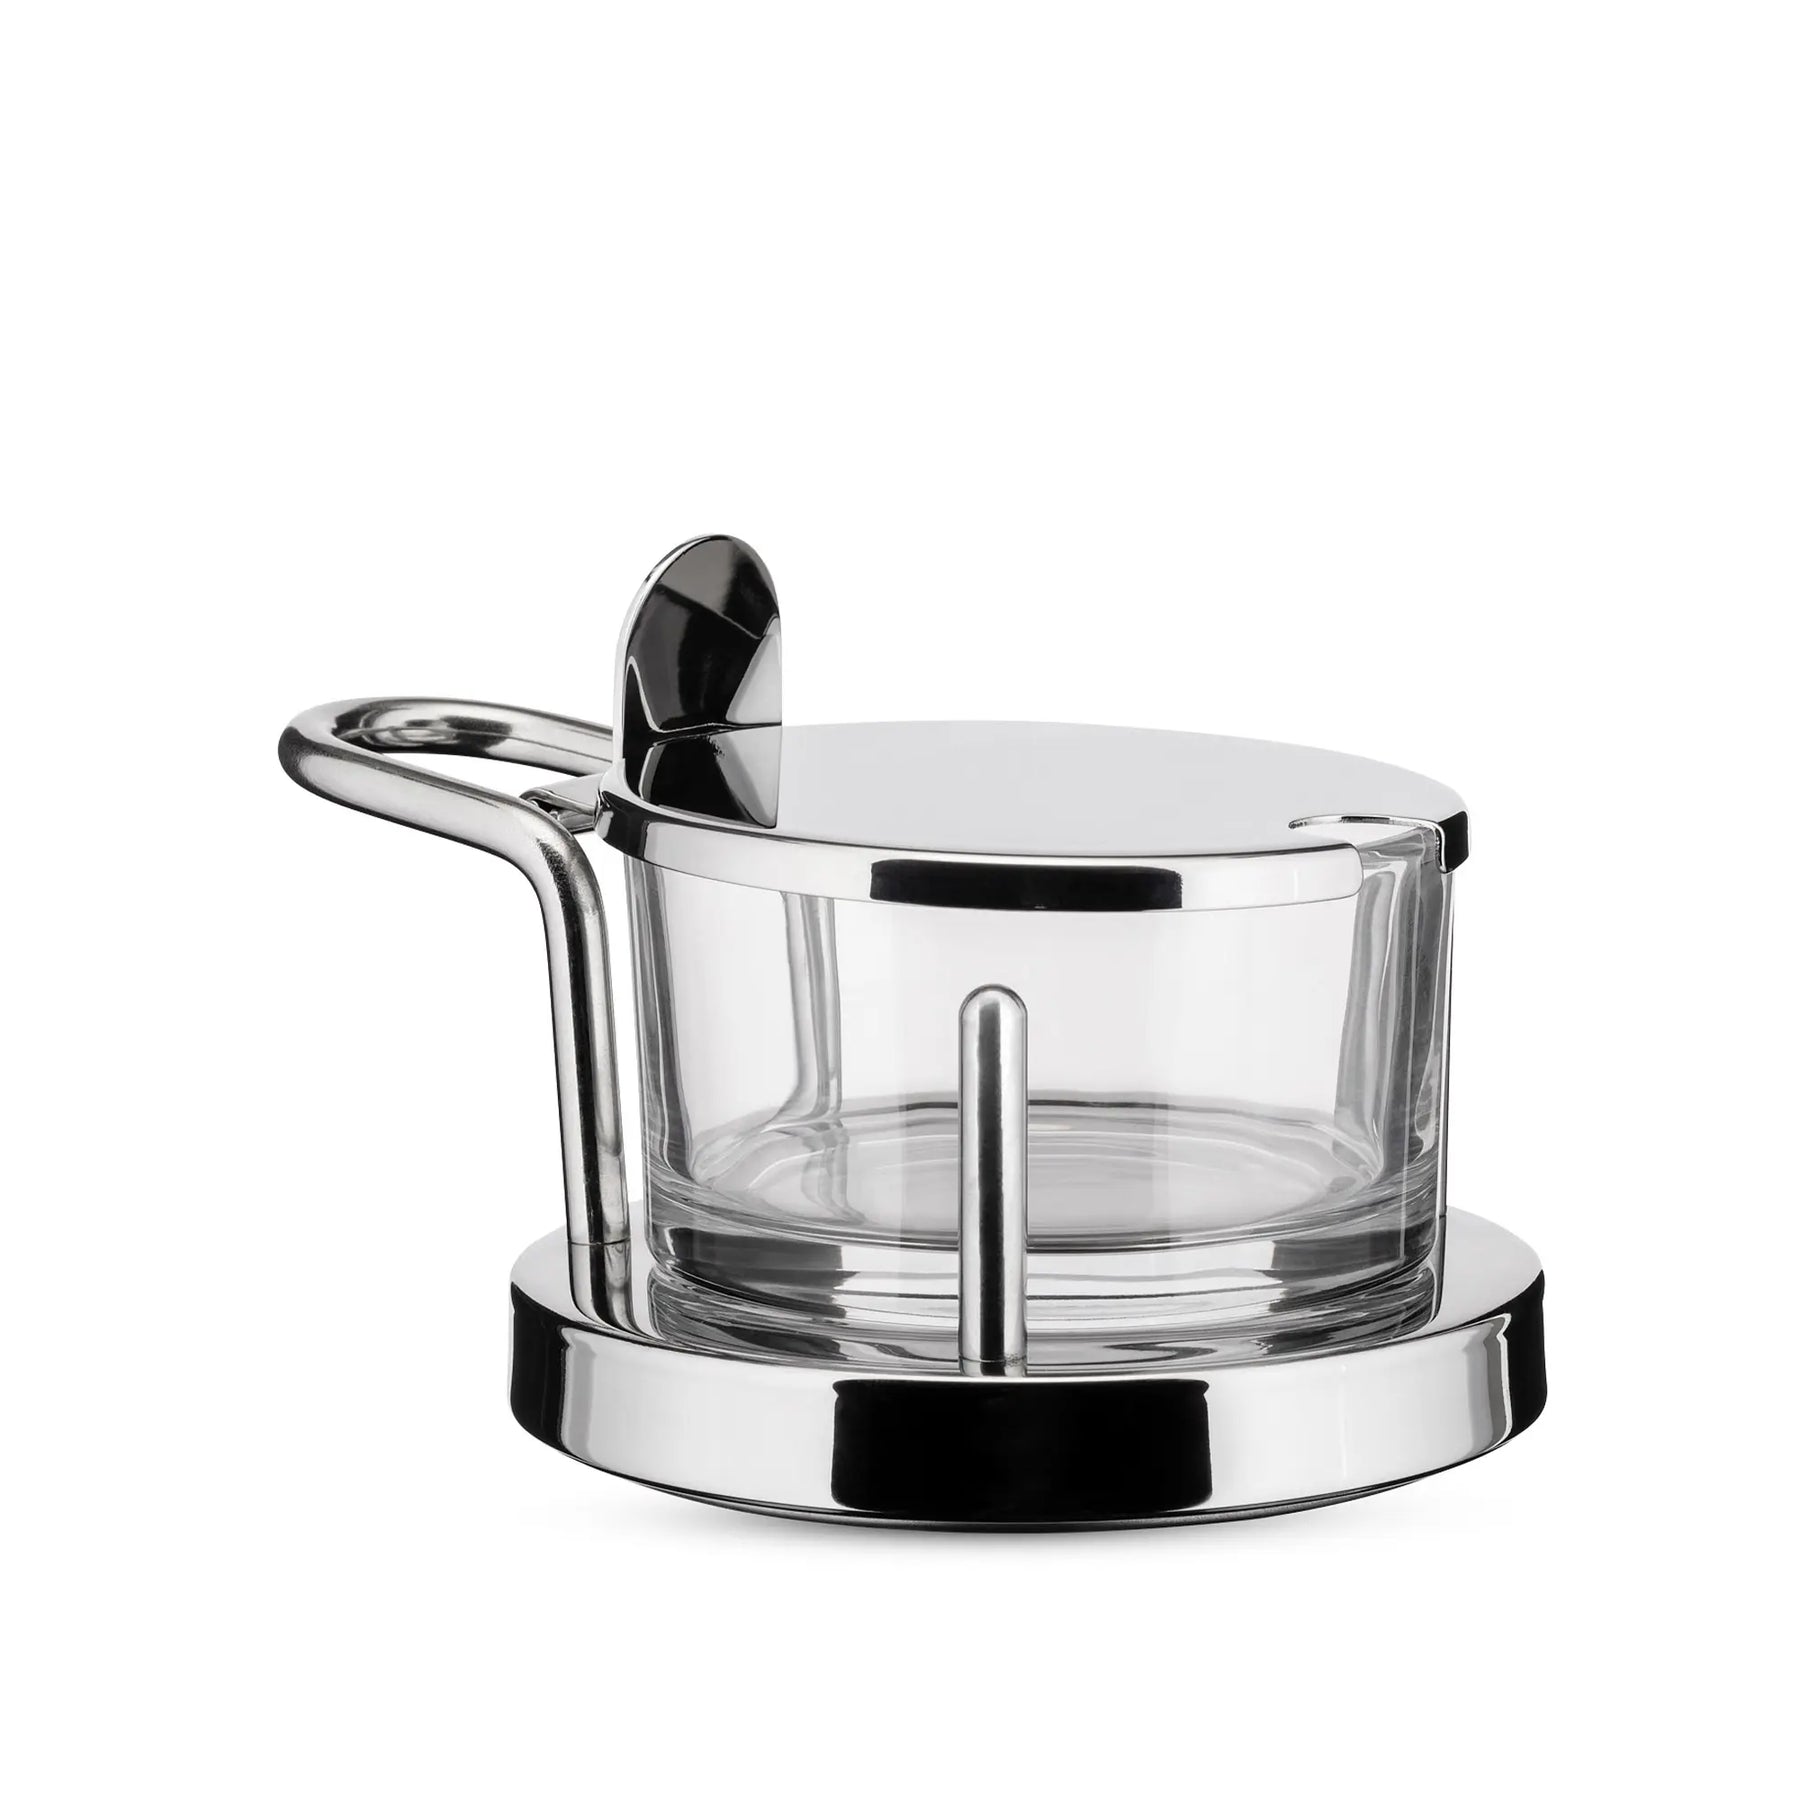 Alessi Ettore Sottsass Stainless steel and glass Parmesan cheese Cellar